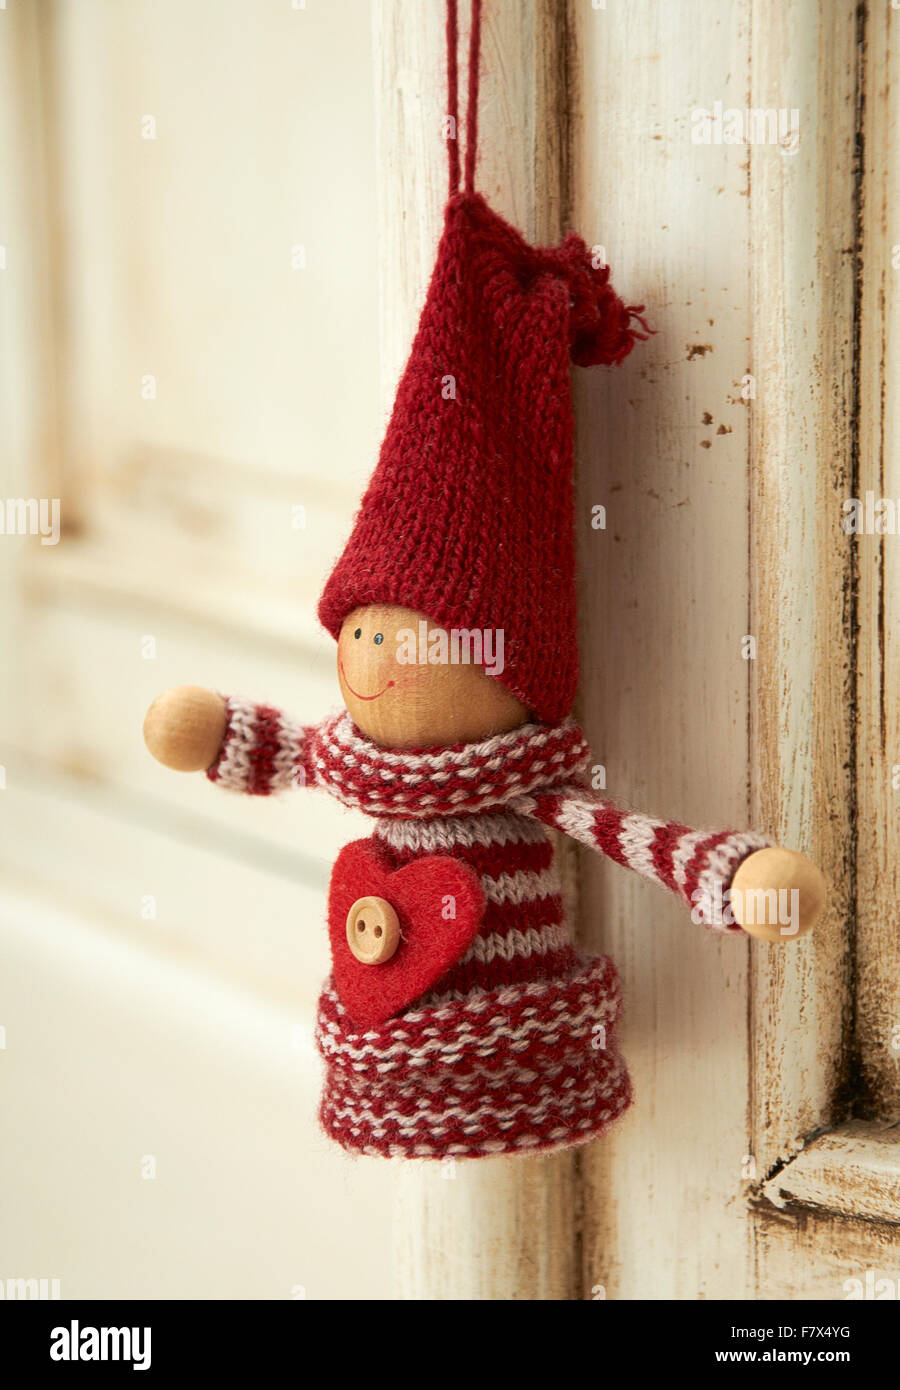 Christmas ornament hanging on a wooden door Stock Photo